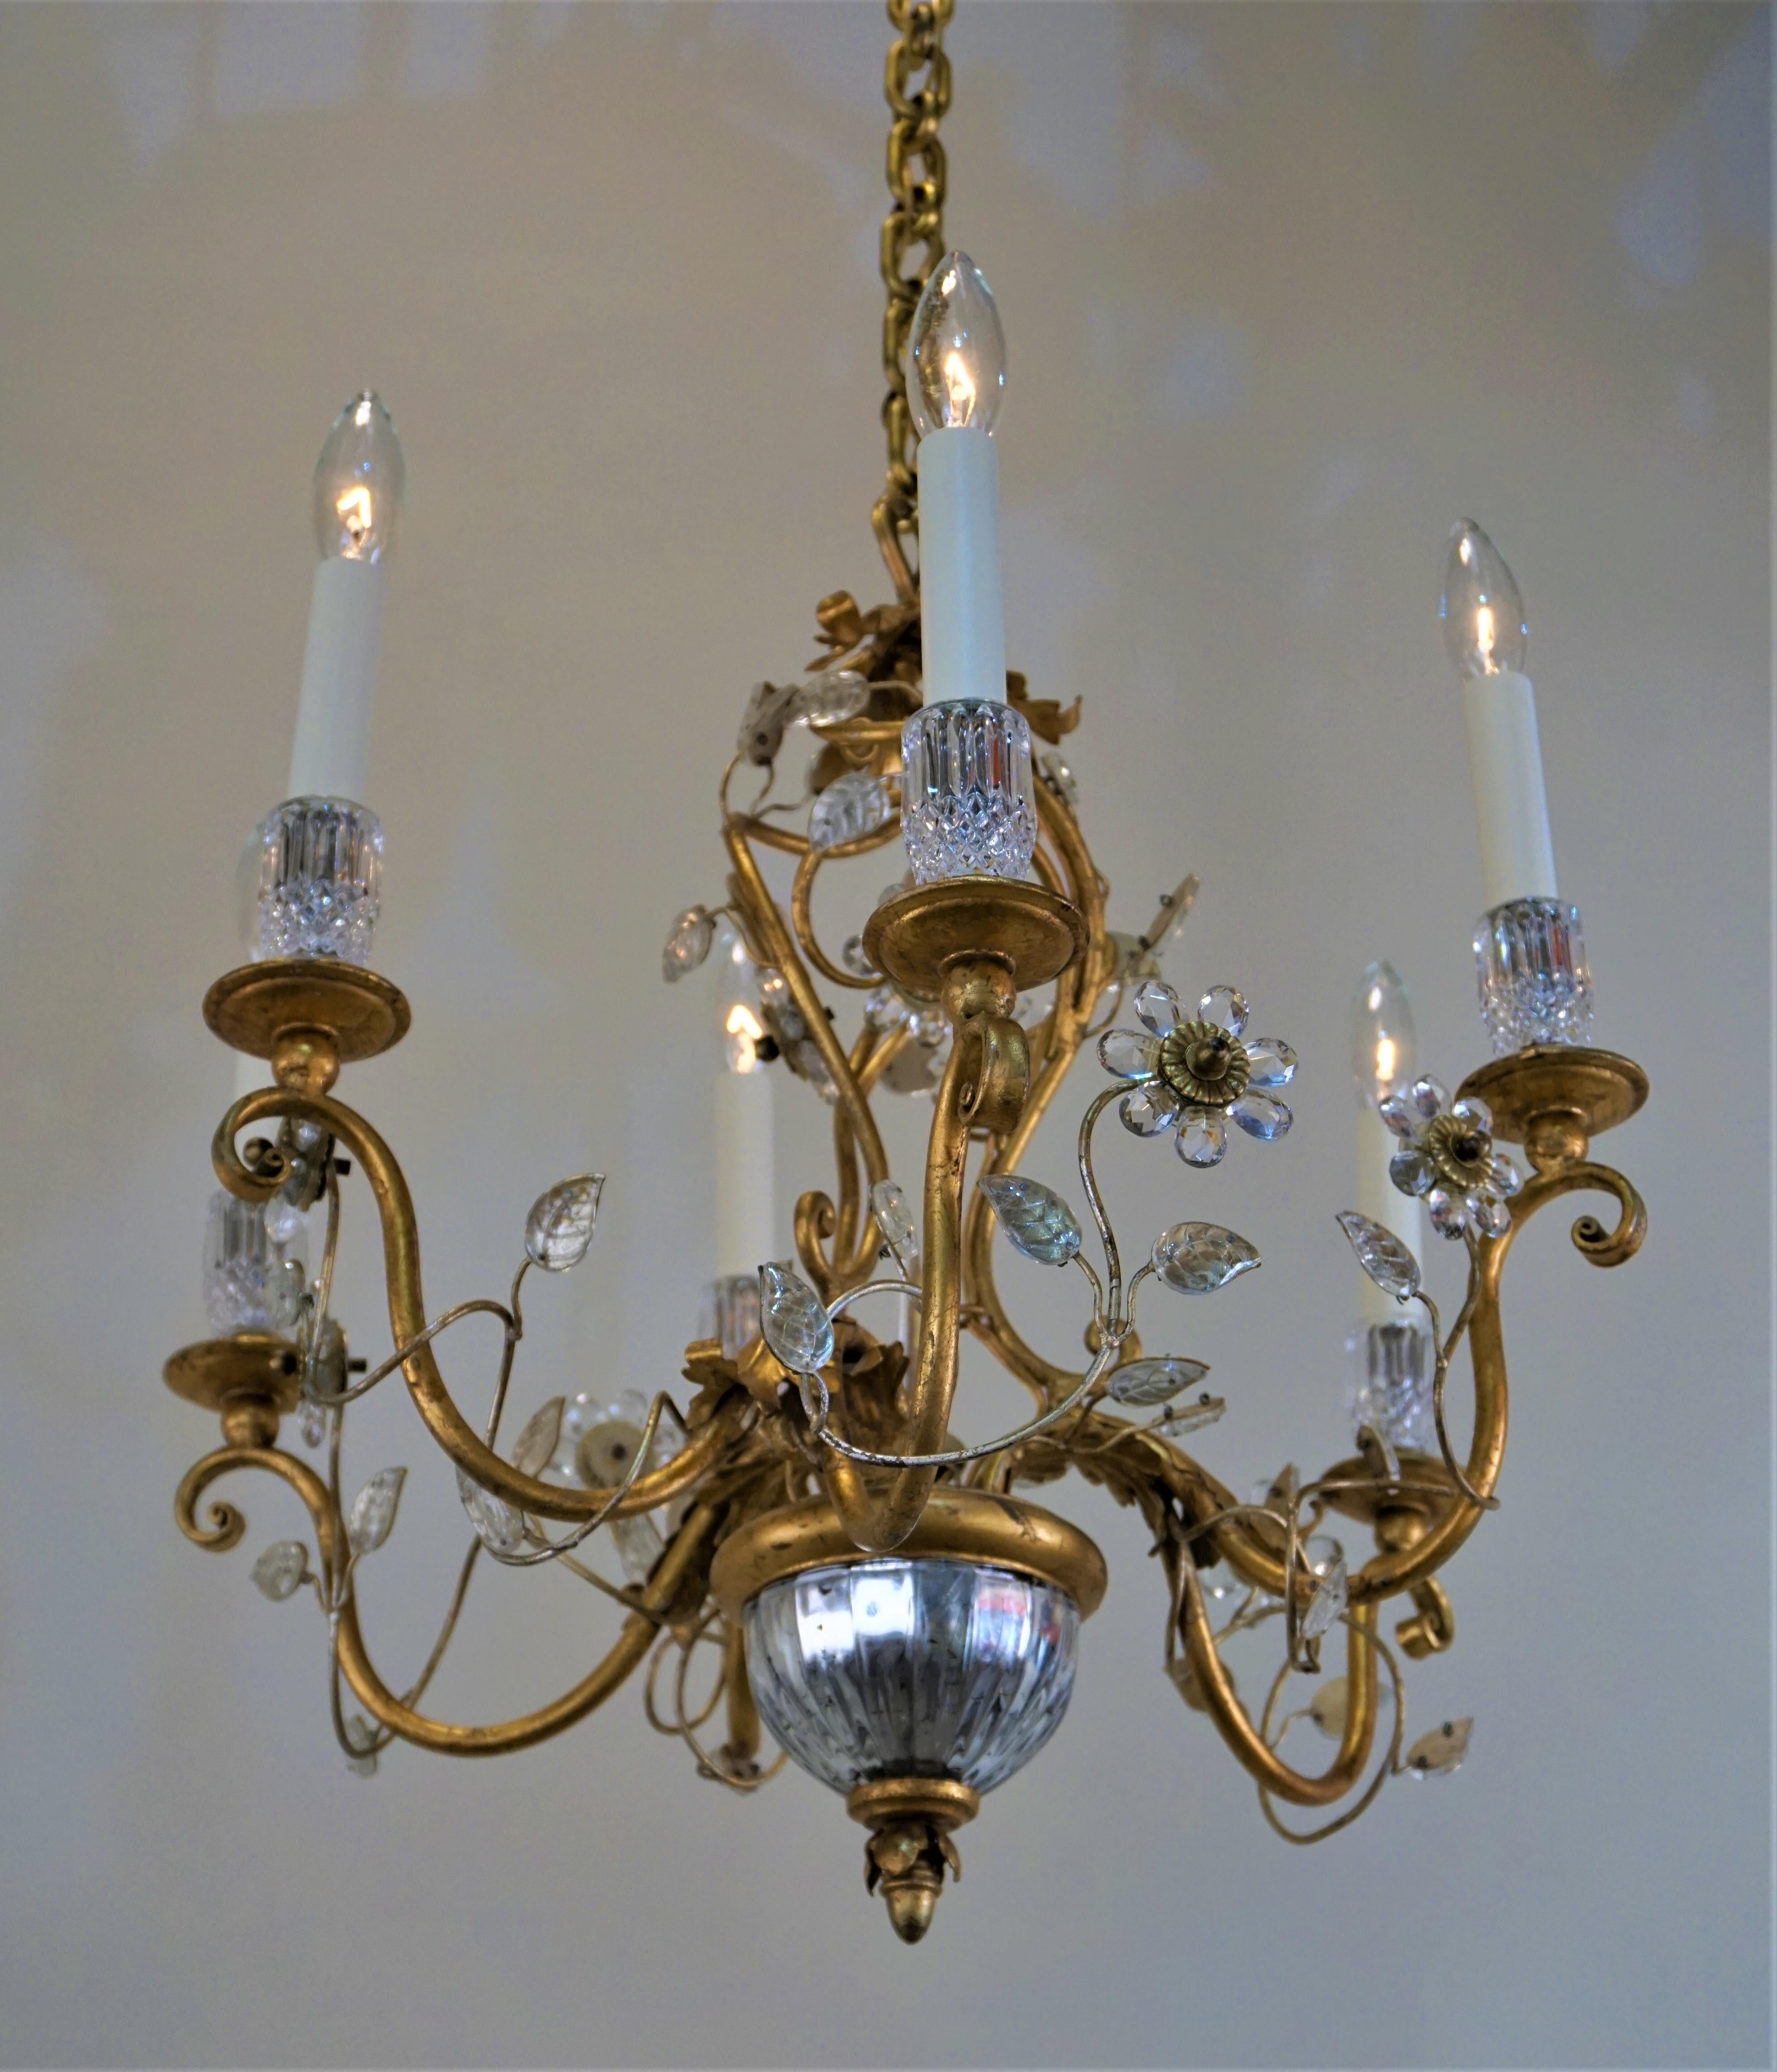 Superb handcrafted Maison Baguès crystal and gilded six-light chandelier. Decorated with crystal beads and flowers design.
Body is21